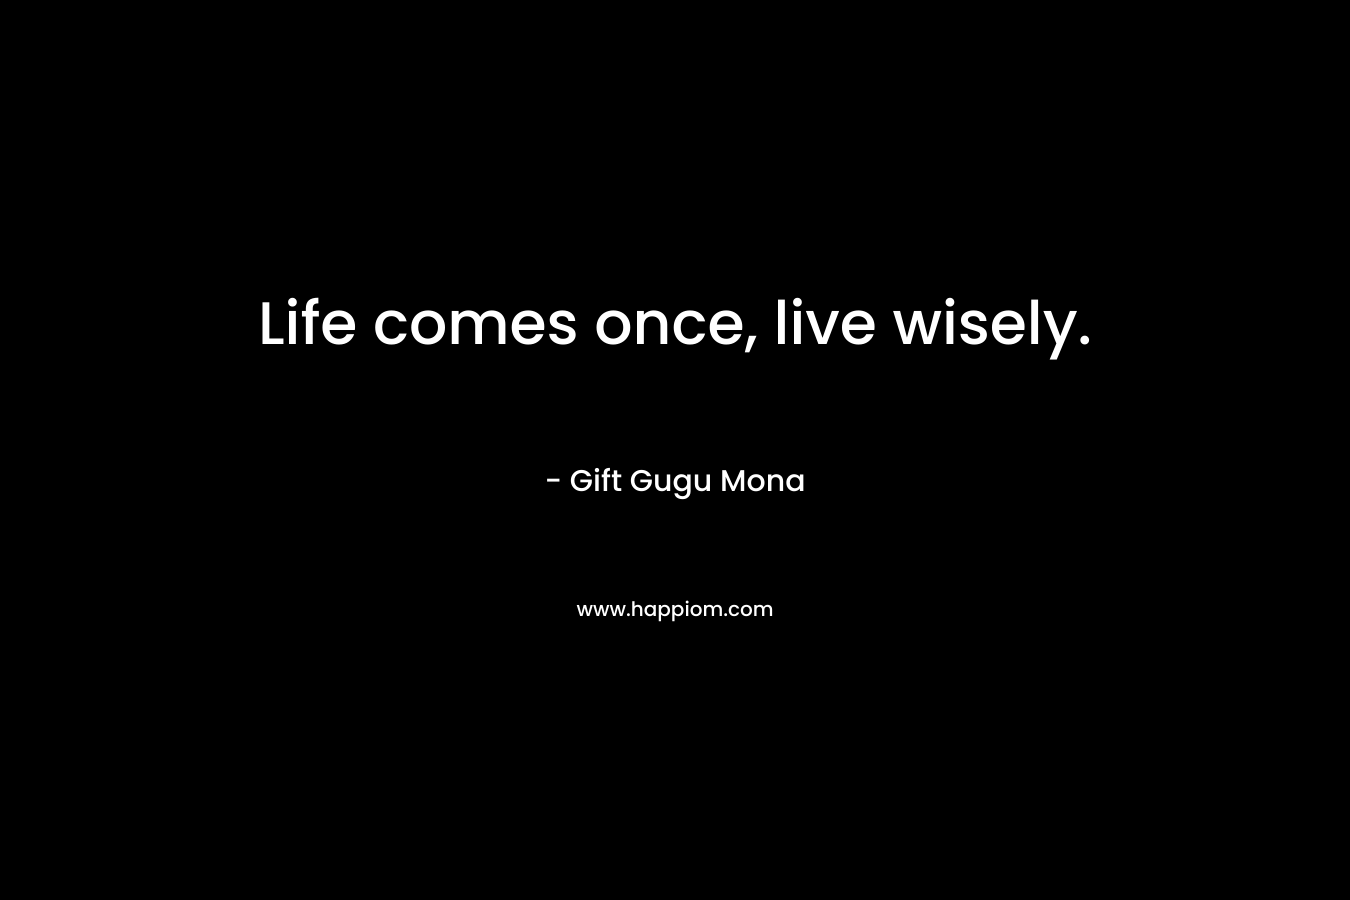 Life comes once, live wisely.